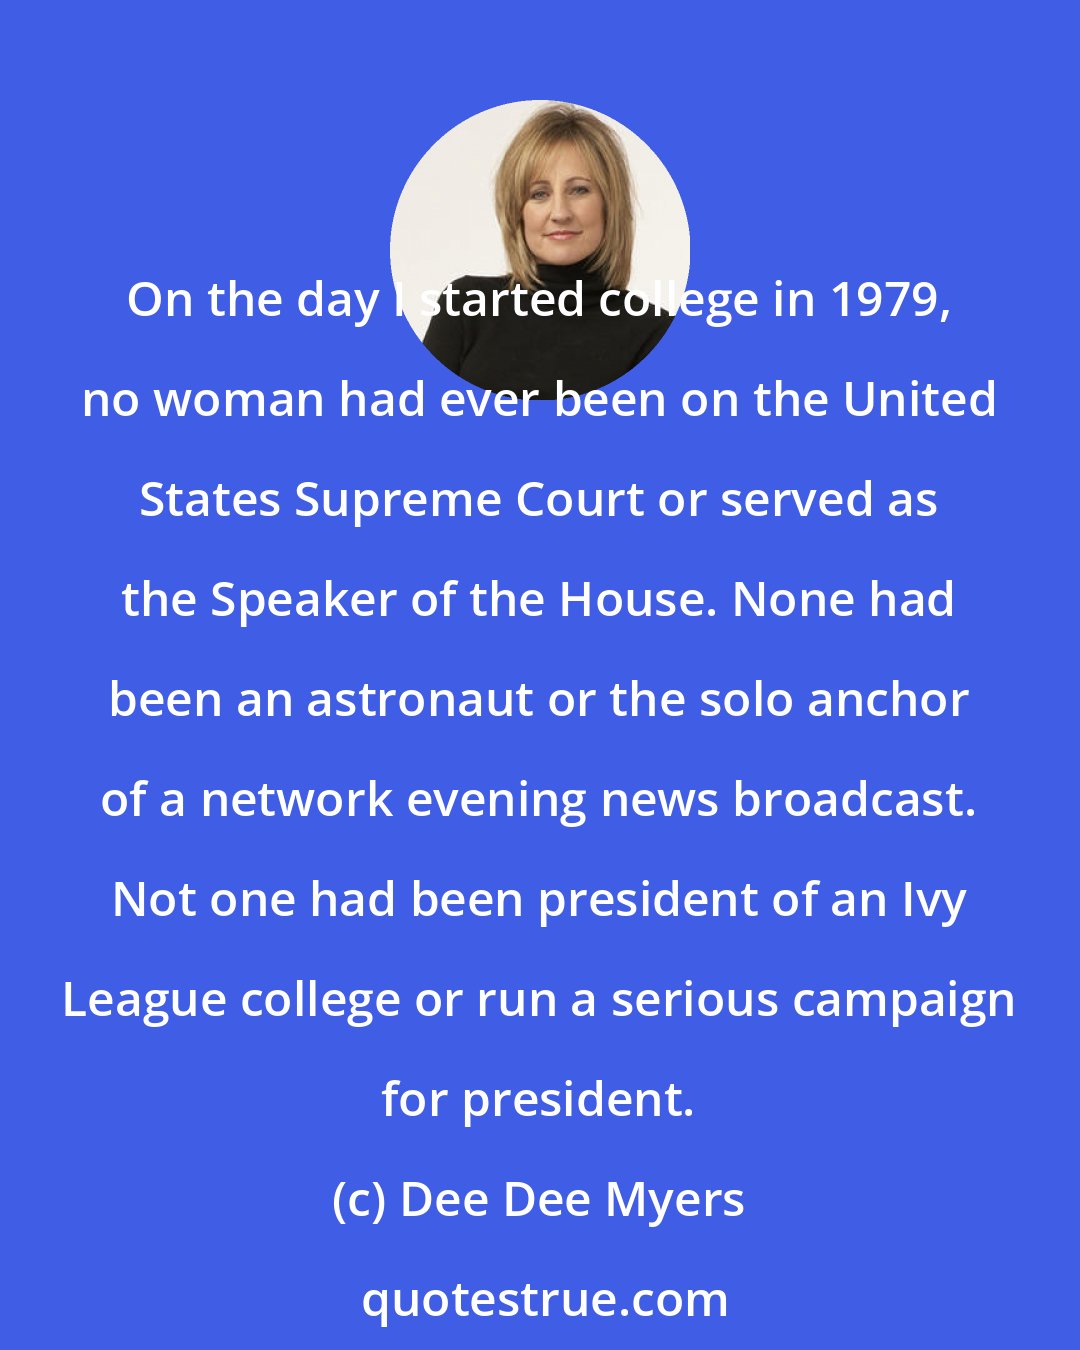 Dee Dee Myers: On the day I started college in 1979, no woman had ever been on the United States Supreme Court or served as the Speaker of the House. None had been an astronaut or the solo anchor of a network evening news broadcast. Not one had been president of an Ivy League college or run a serious campaign for president.